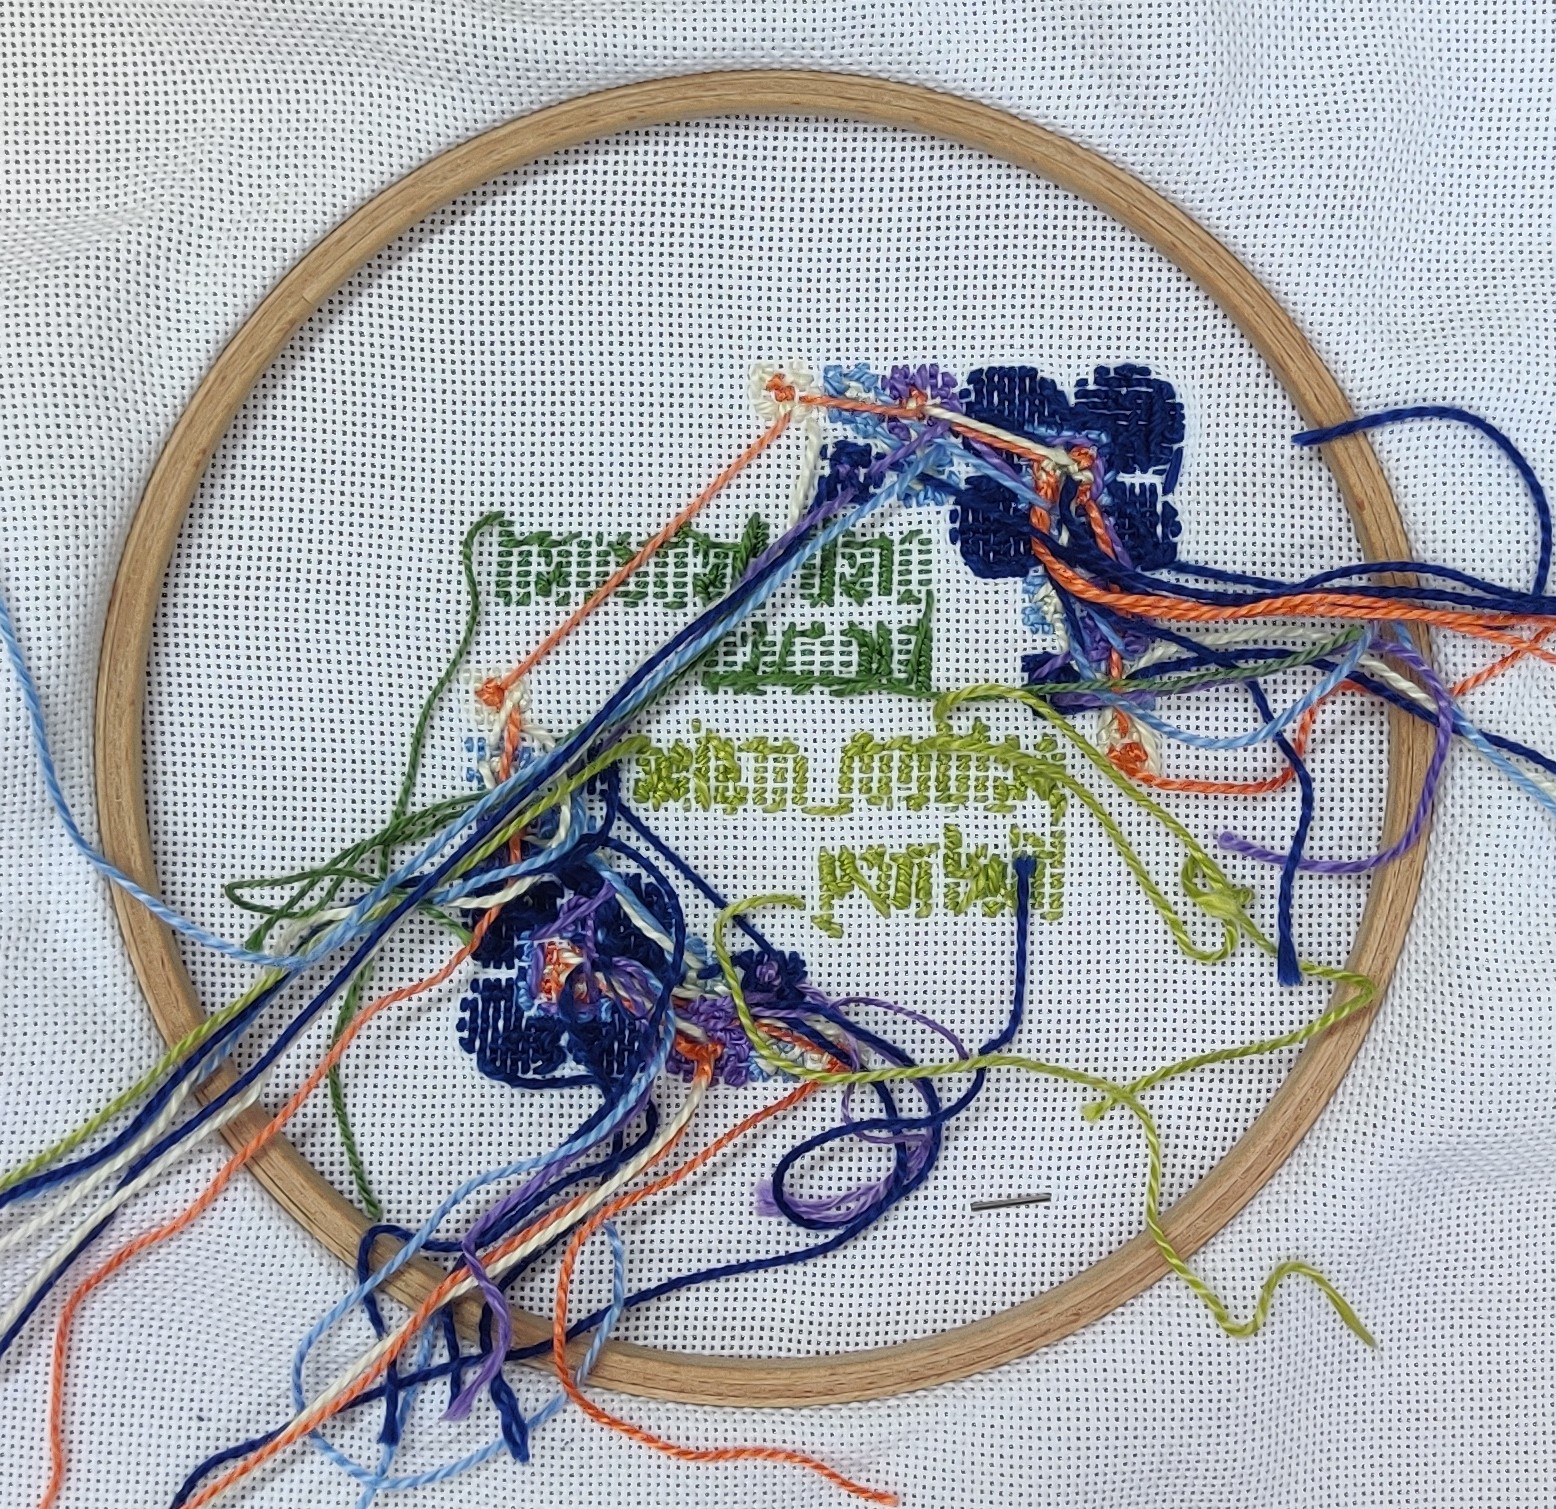 Backside of embroidery